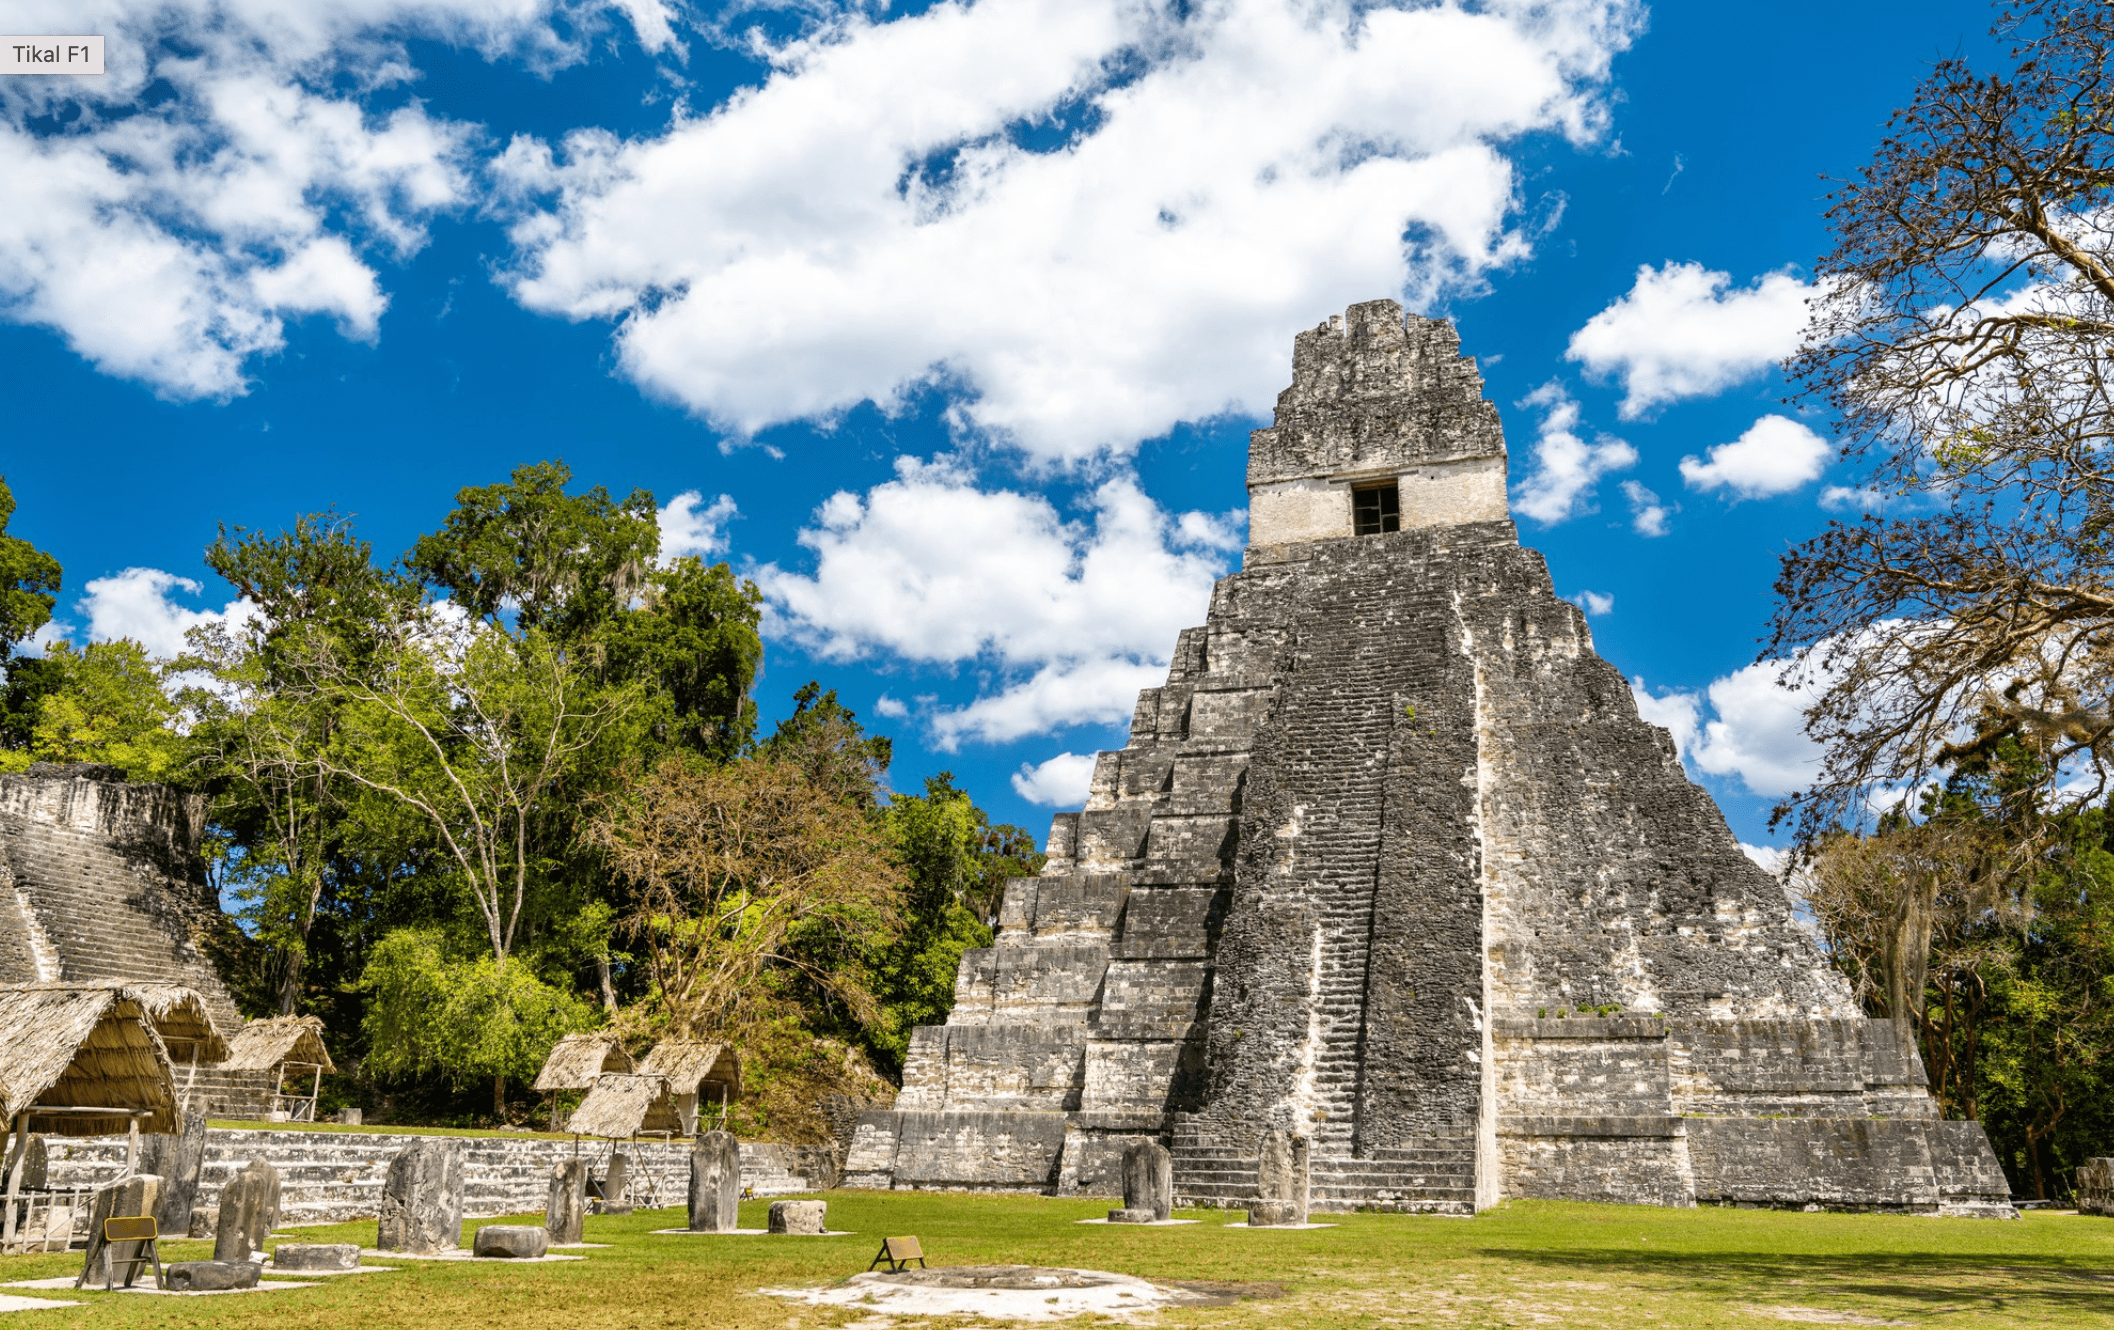 Tikal is a UNESCO World Heritage site and one of the largest and most impressive Mayan cities